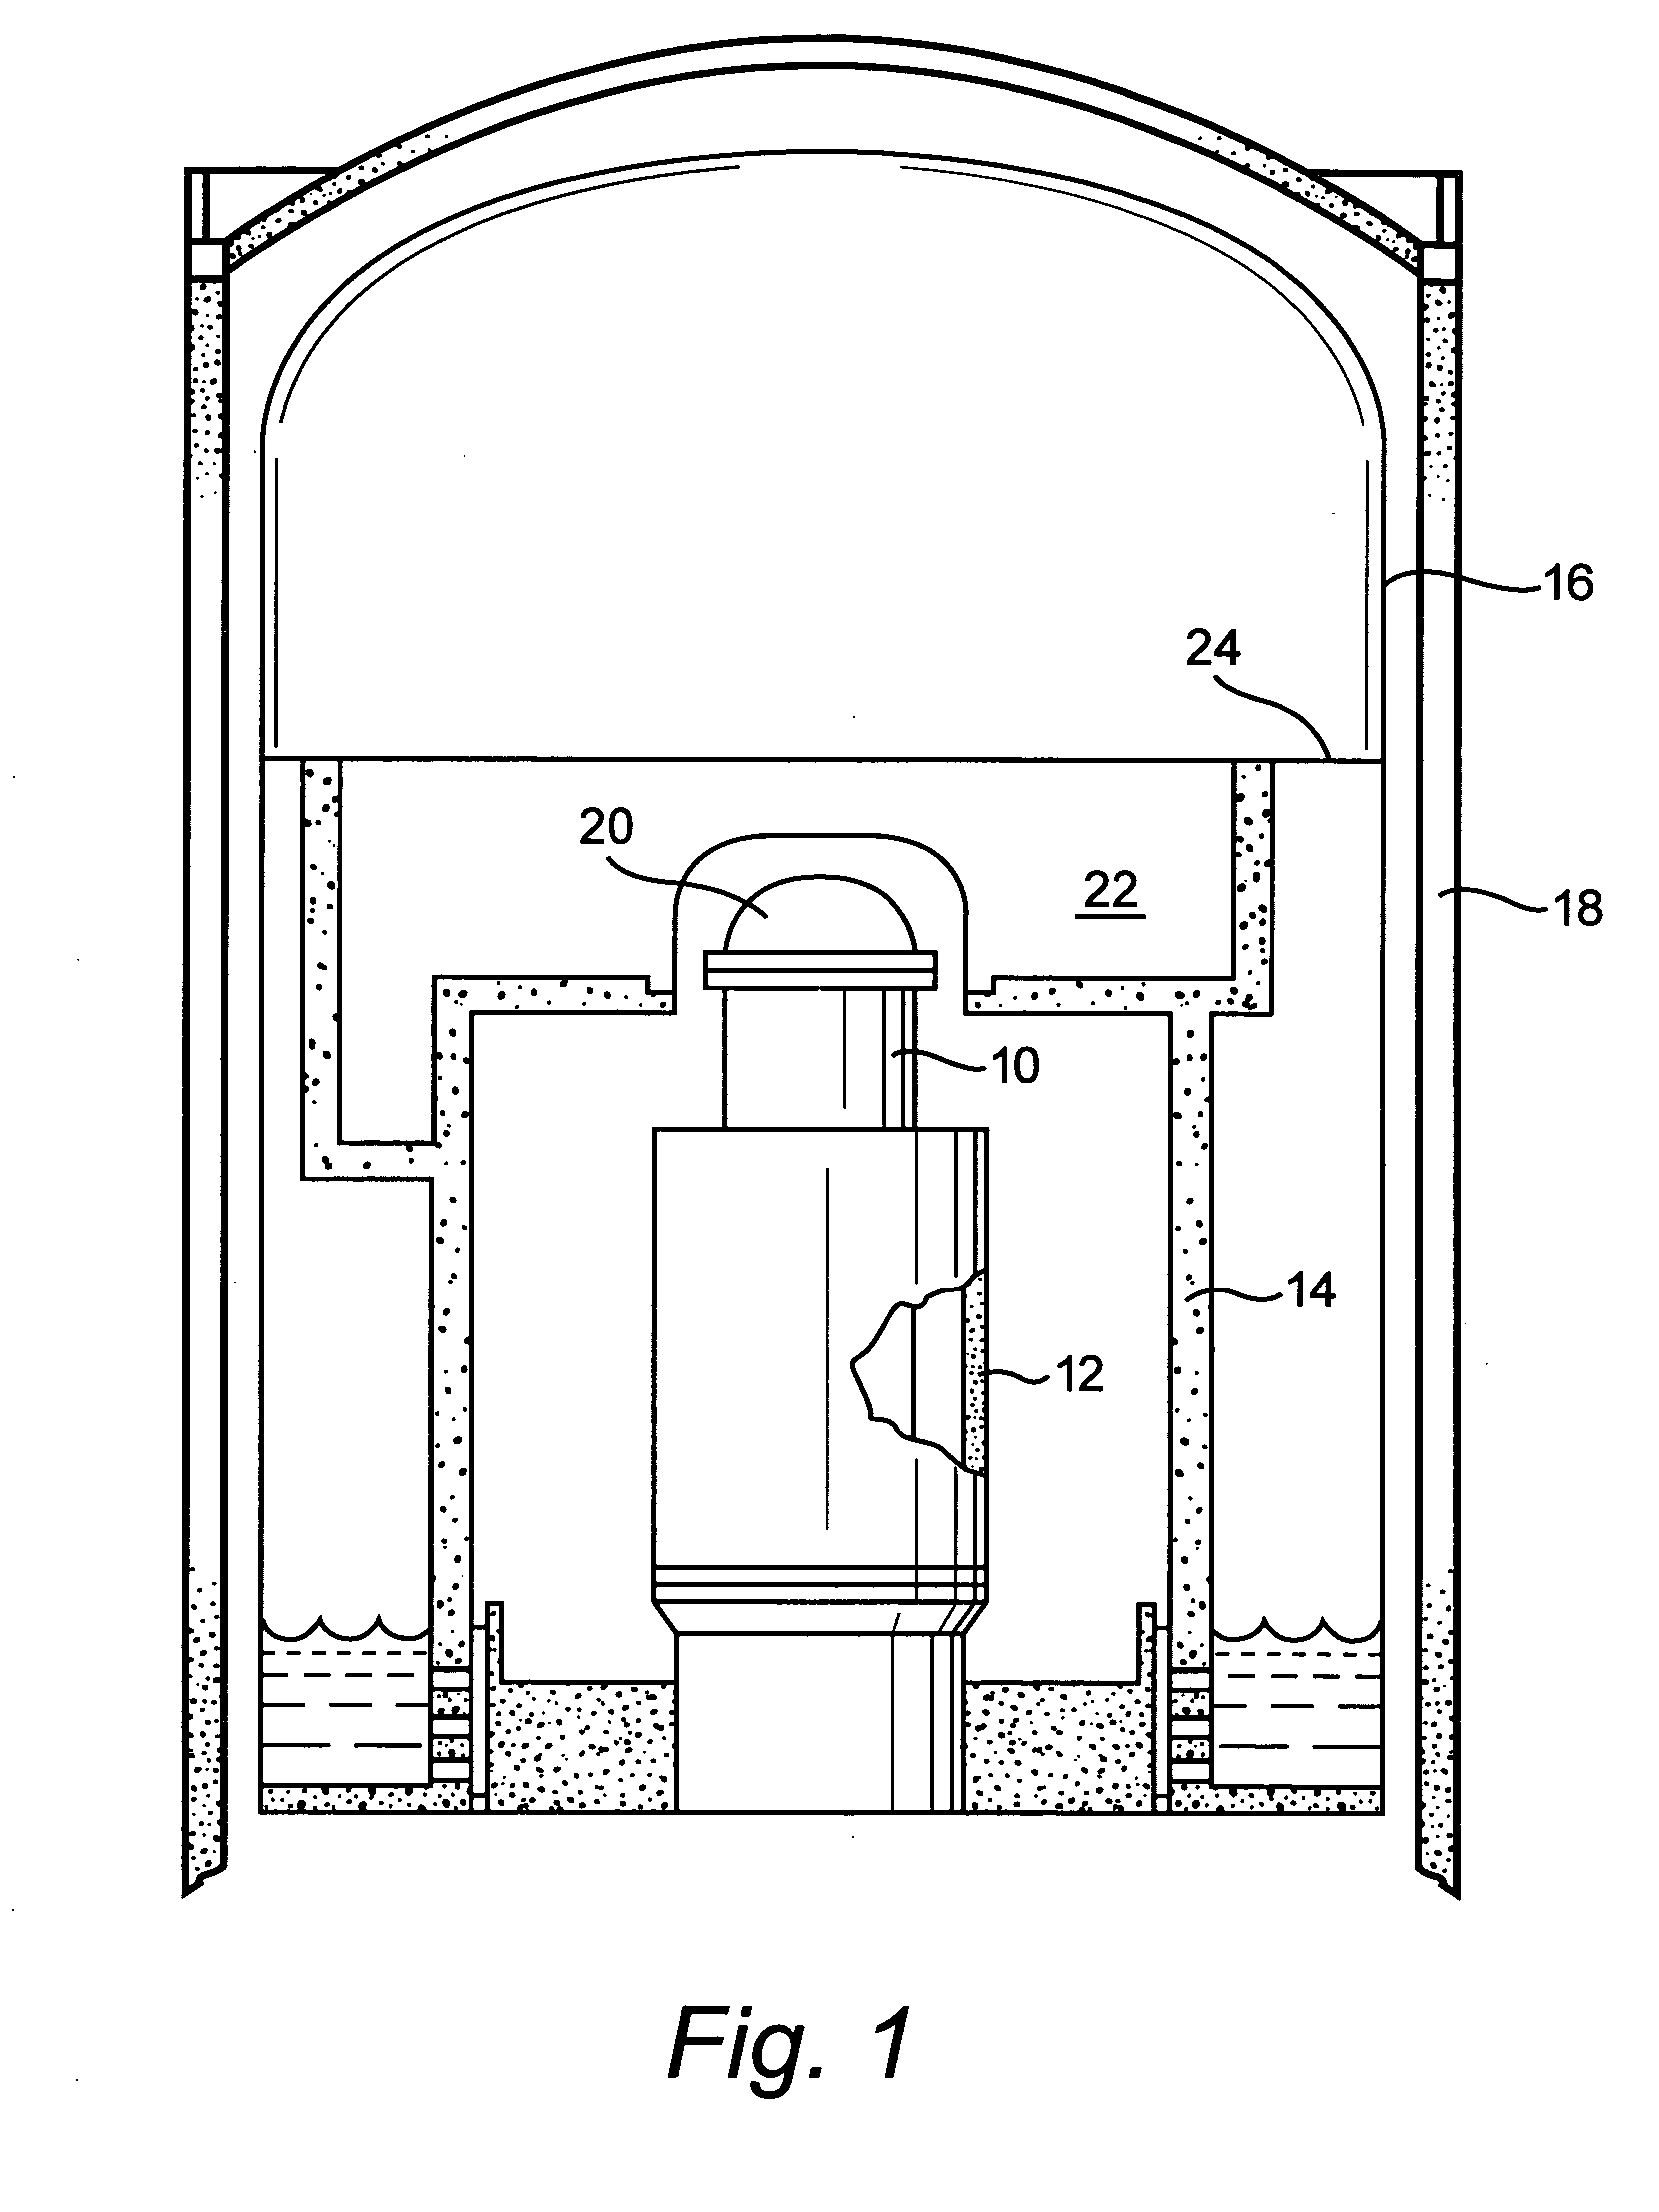 Method of inspecting or utilizing tools in a nuclear reactor environment